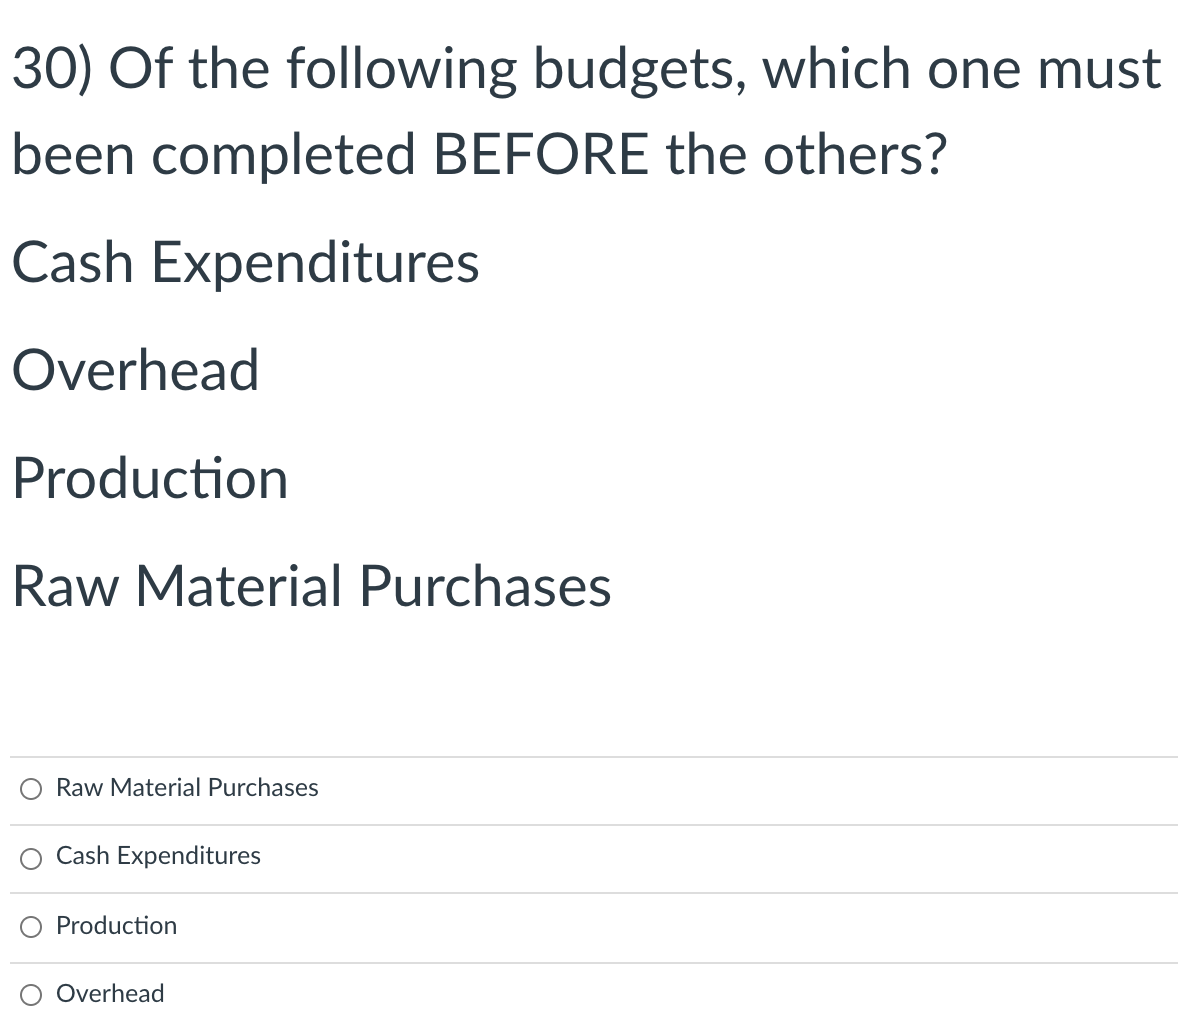 30) Of the following budgets, which one must
been completed BEFORE the others?
Cash Expenditures
Overhead
Production
Raw Material Purchases
Raw Material Purchases
Cash Expenditures
O Production
Overhead
